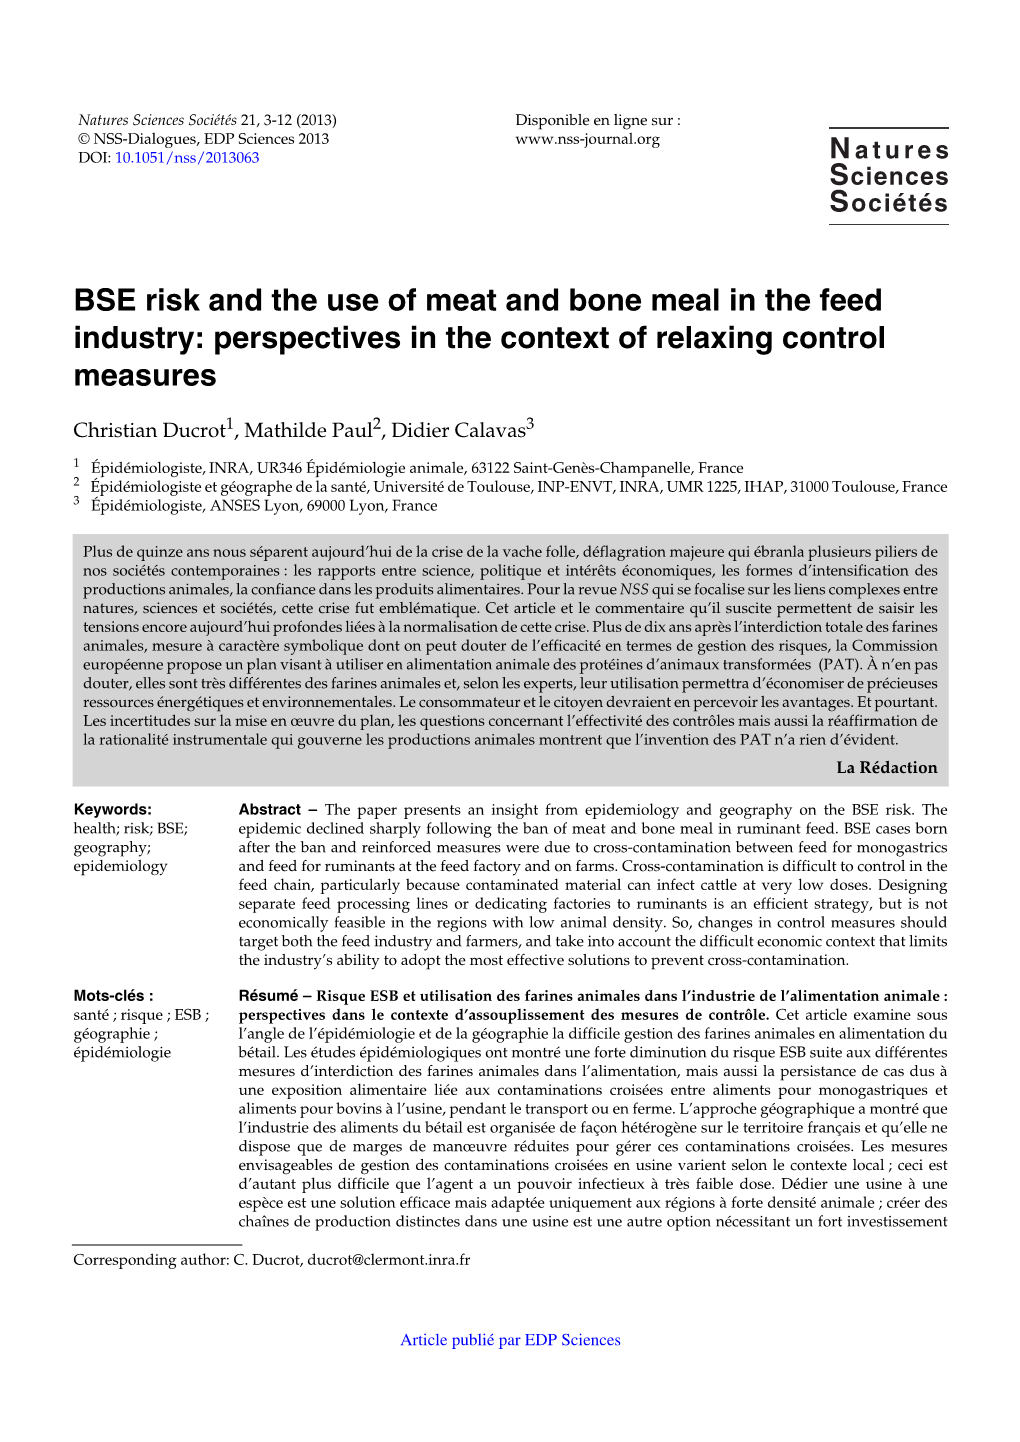 BSE Risk and the Use of Meat and Bone Meal in the Feed Industry: Perspectives in the Context of Relaxing Control Measures